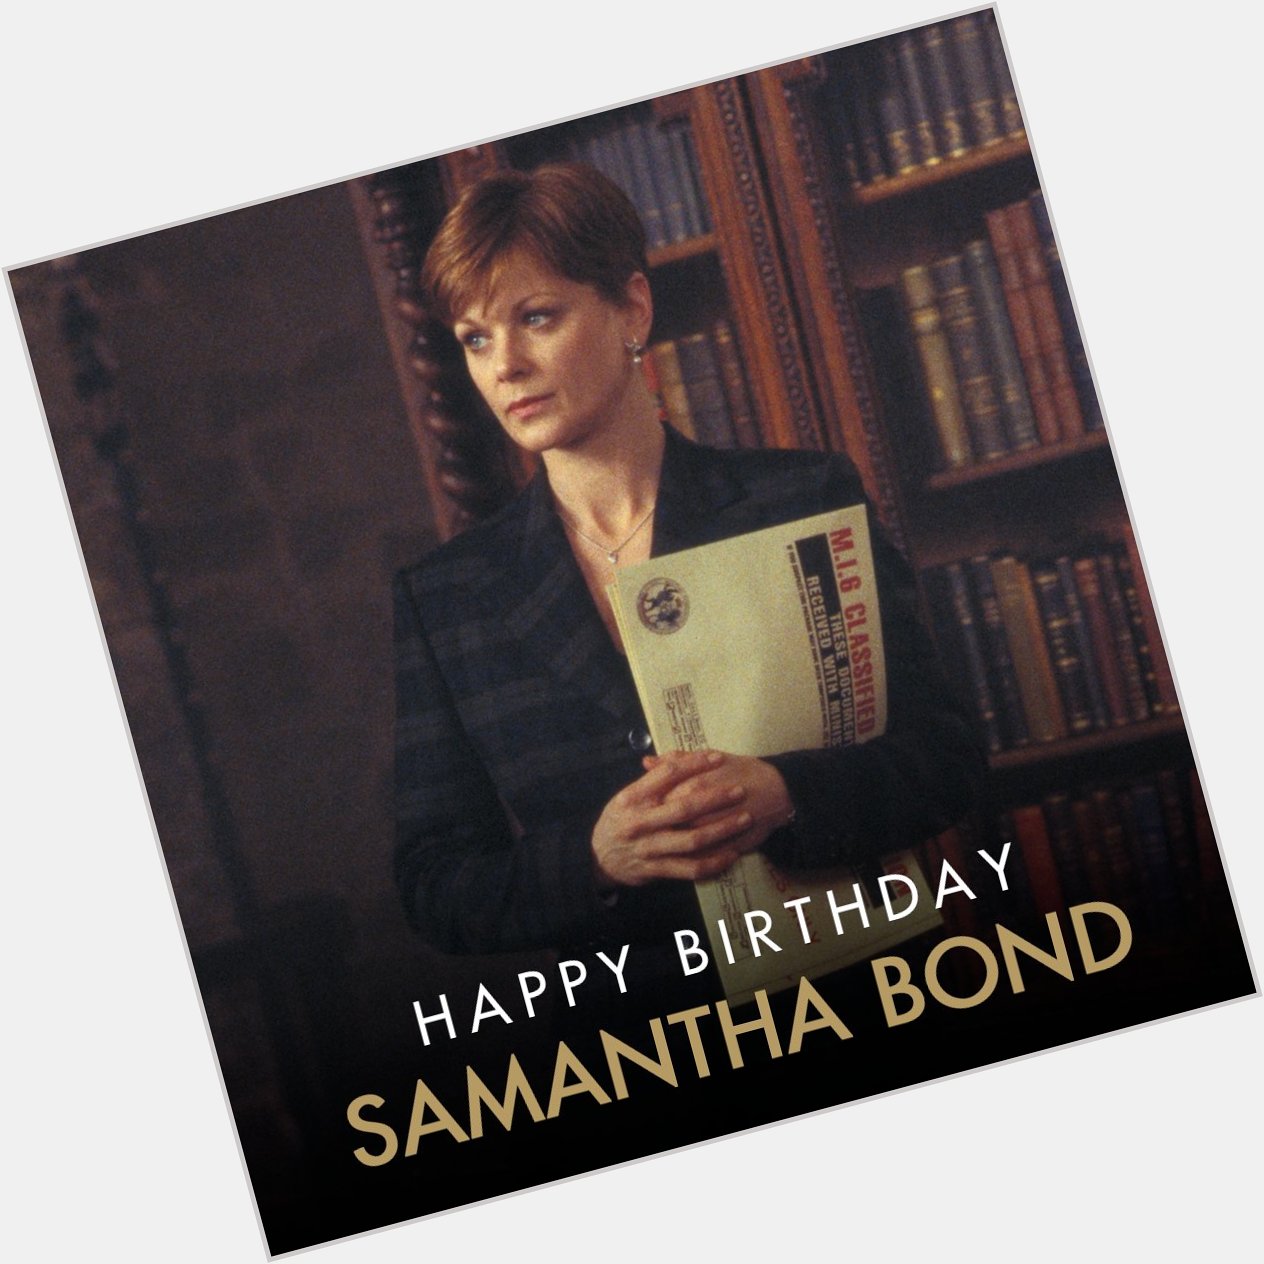 Happy Birthday to Samantha Bond who played Moneypenny from GOLDENEYE (1995) to DIE ANOTHER DAY (2002). 